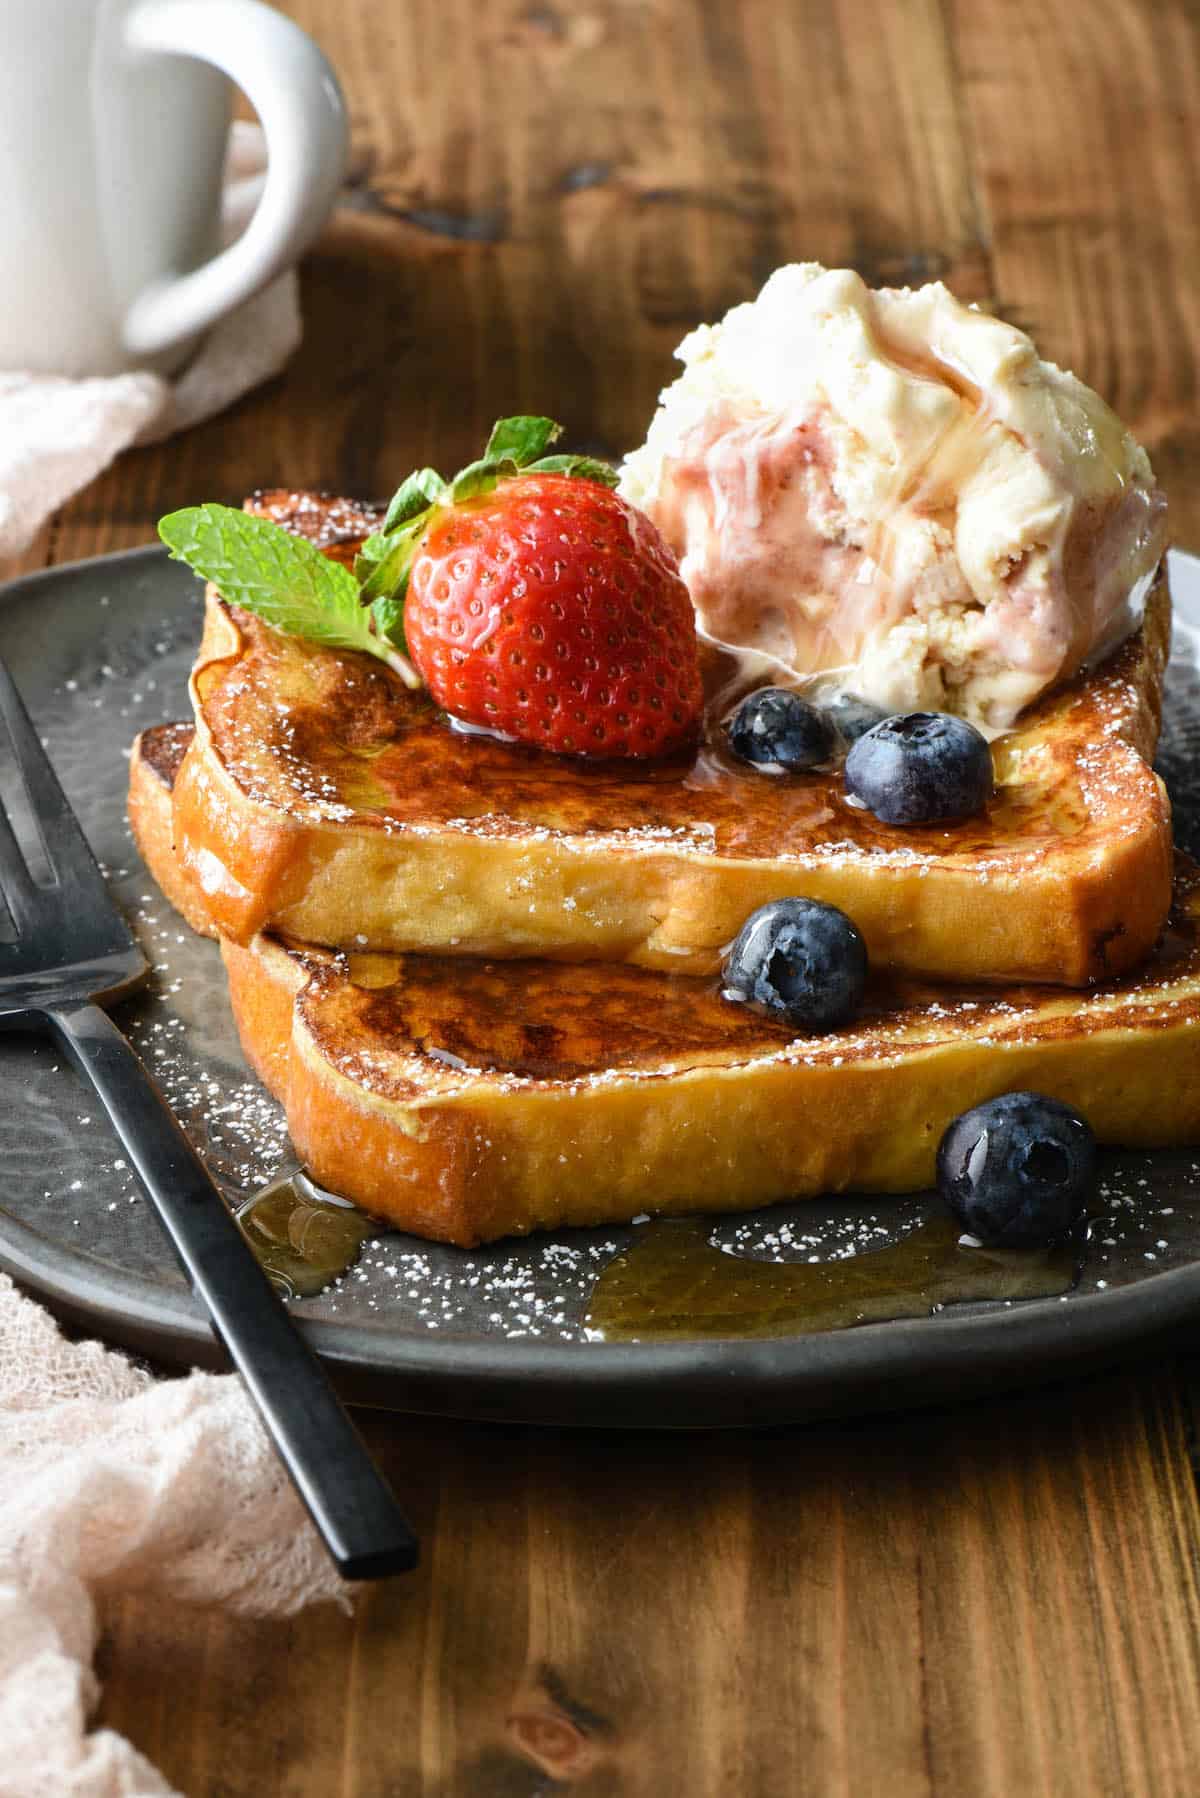 This Brioche French Toast is made with a secret ingredient! This easy-to-follow recipe makes a simple and sweet breakfast treat the whole family will love. | foxeslovelemons.com